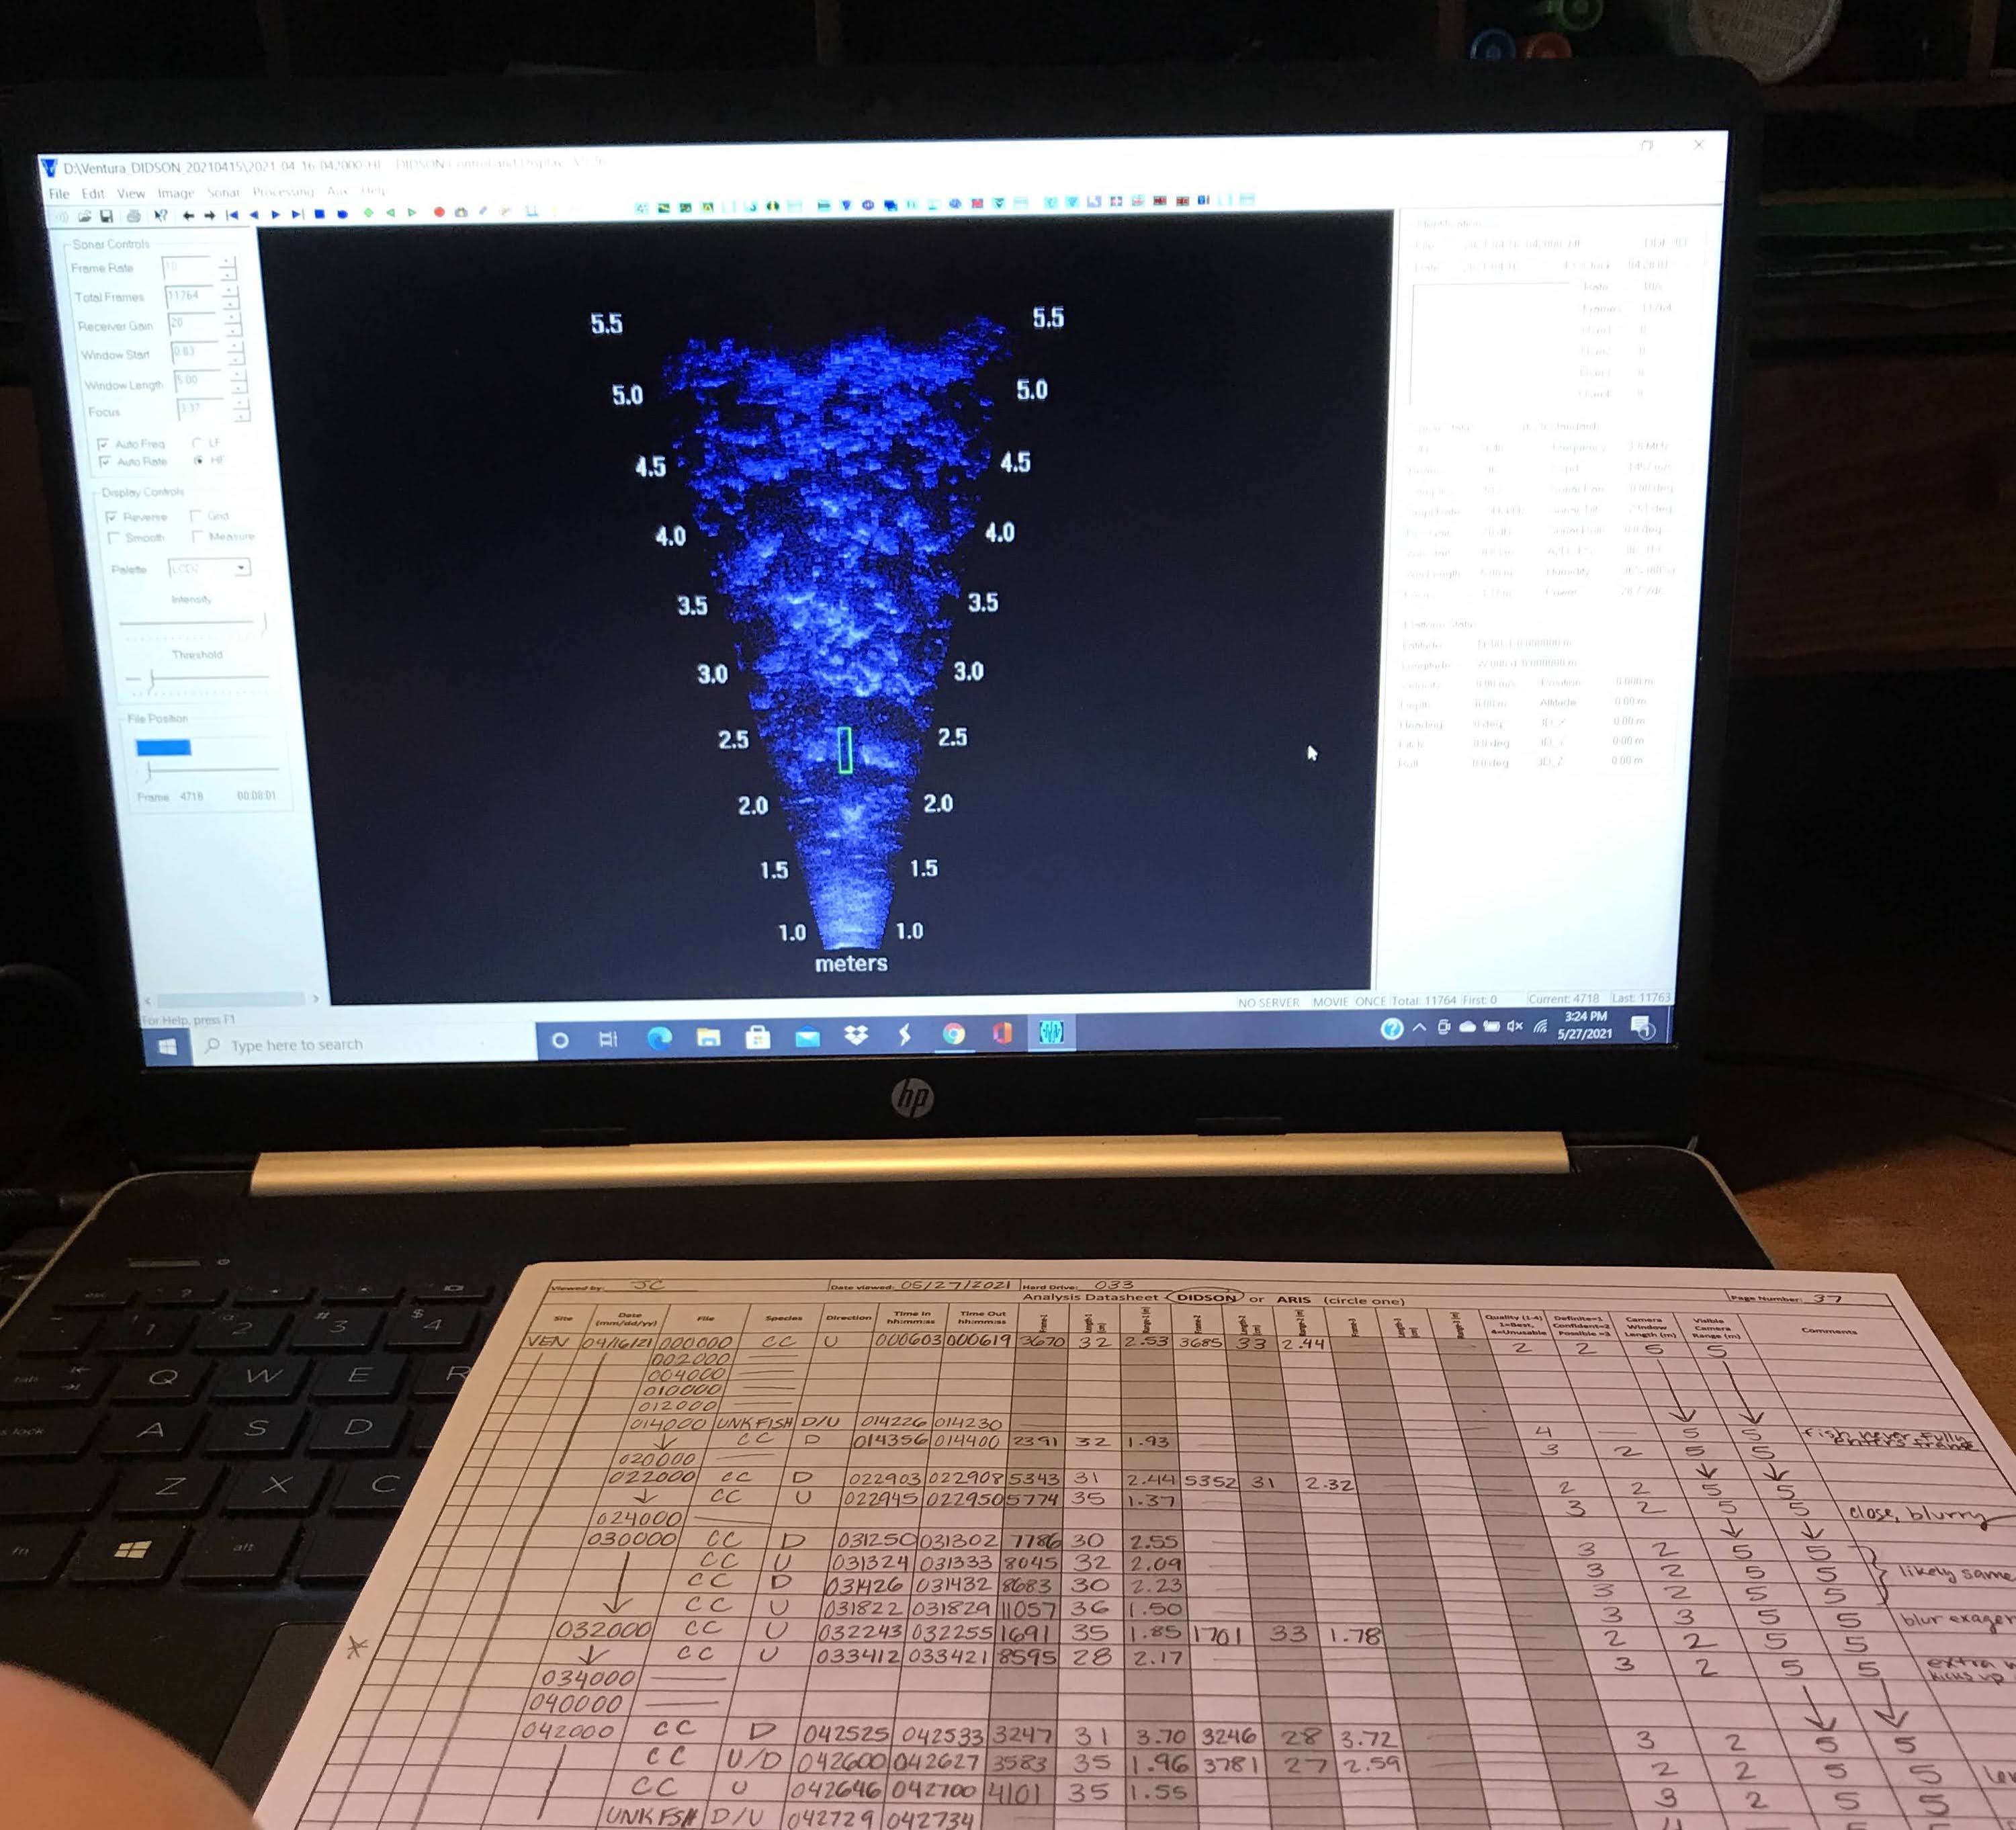 Data entry: reviewing sonar footage for steelhead trout, but mainly recording other native fish, chub, debris, and the occassional water bird or freshwater turtle.